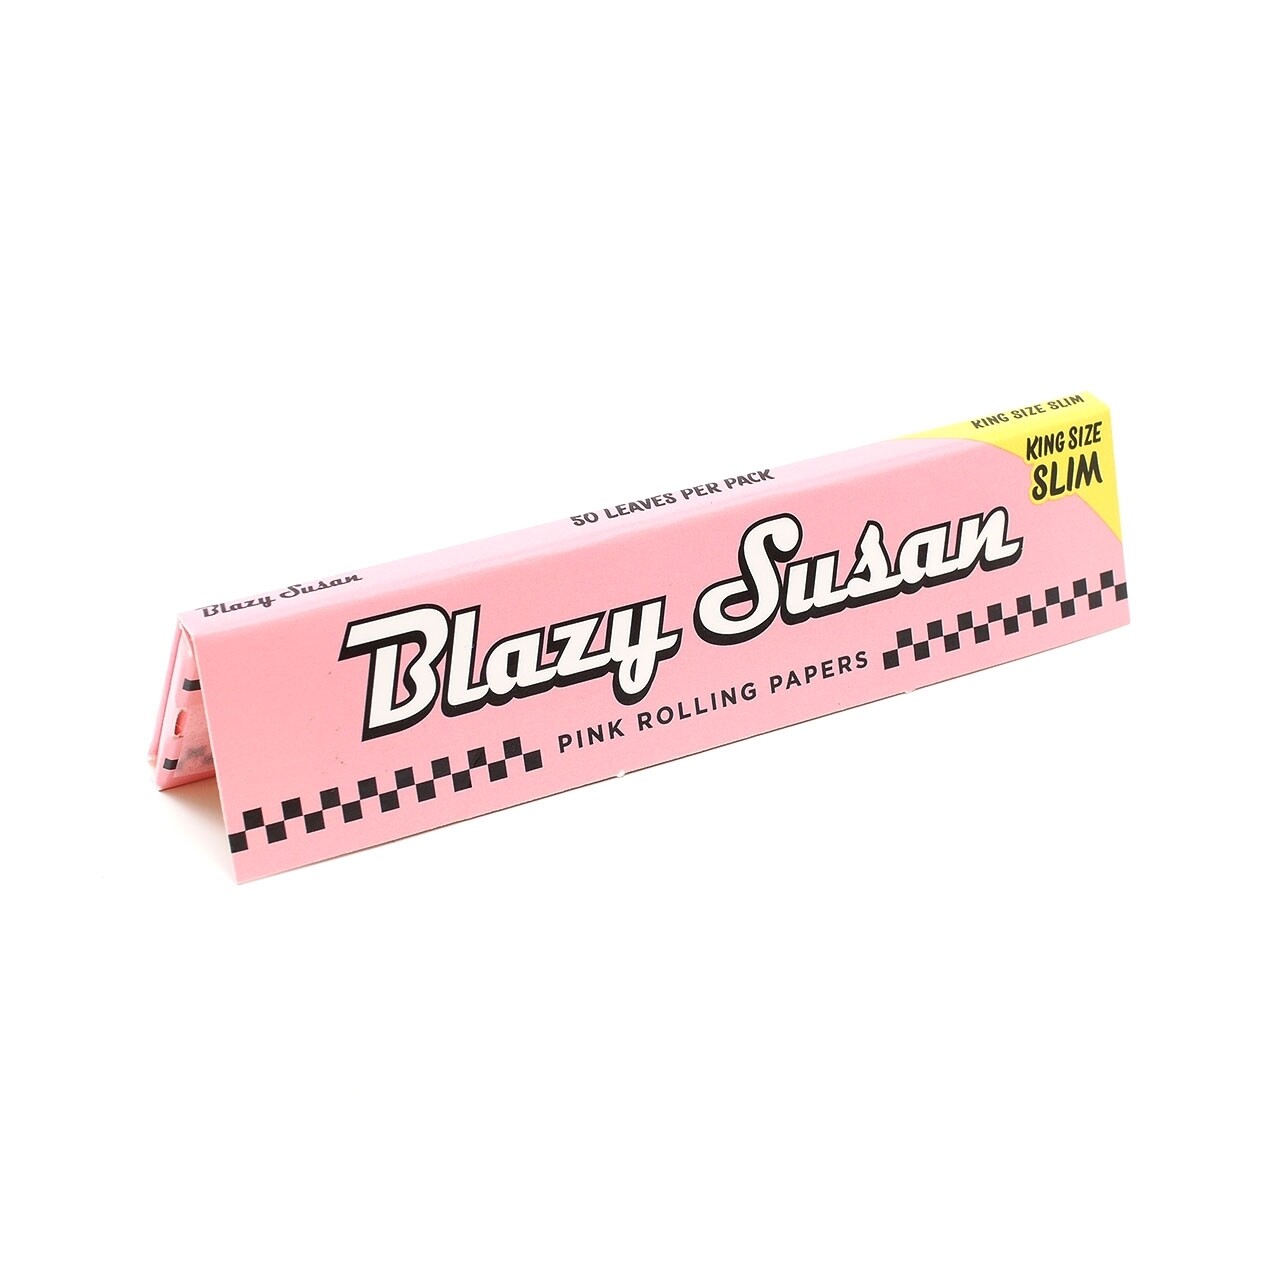 Blazy Susan Pink Papers King Size